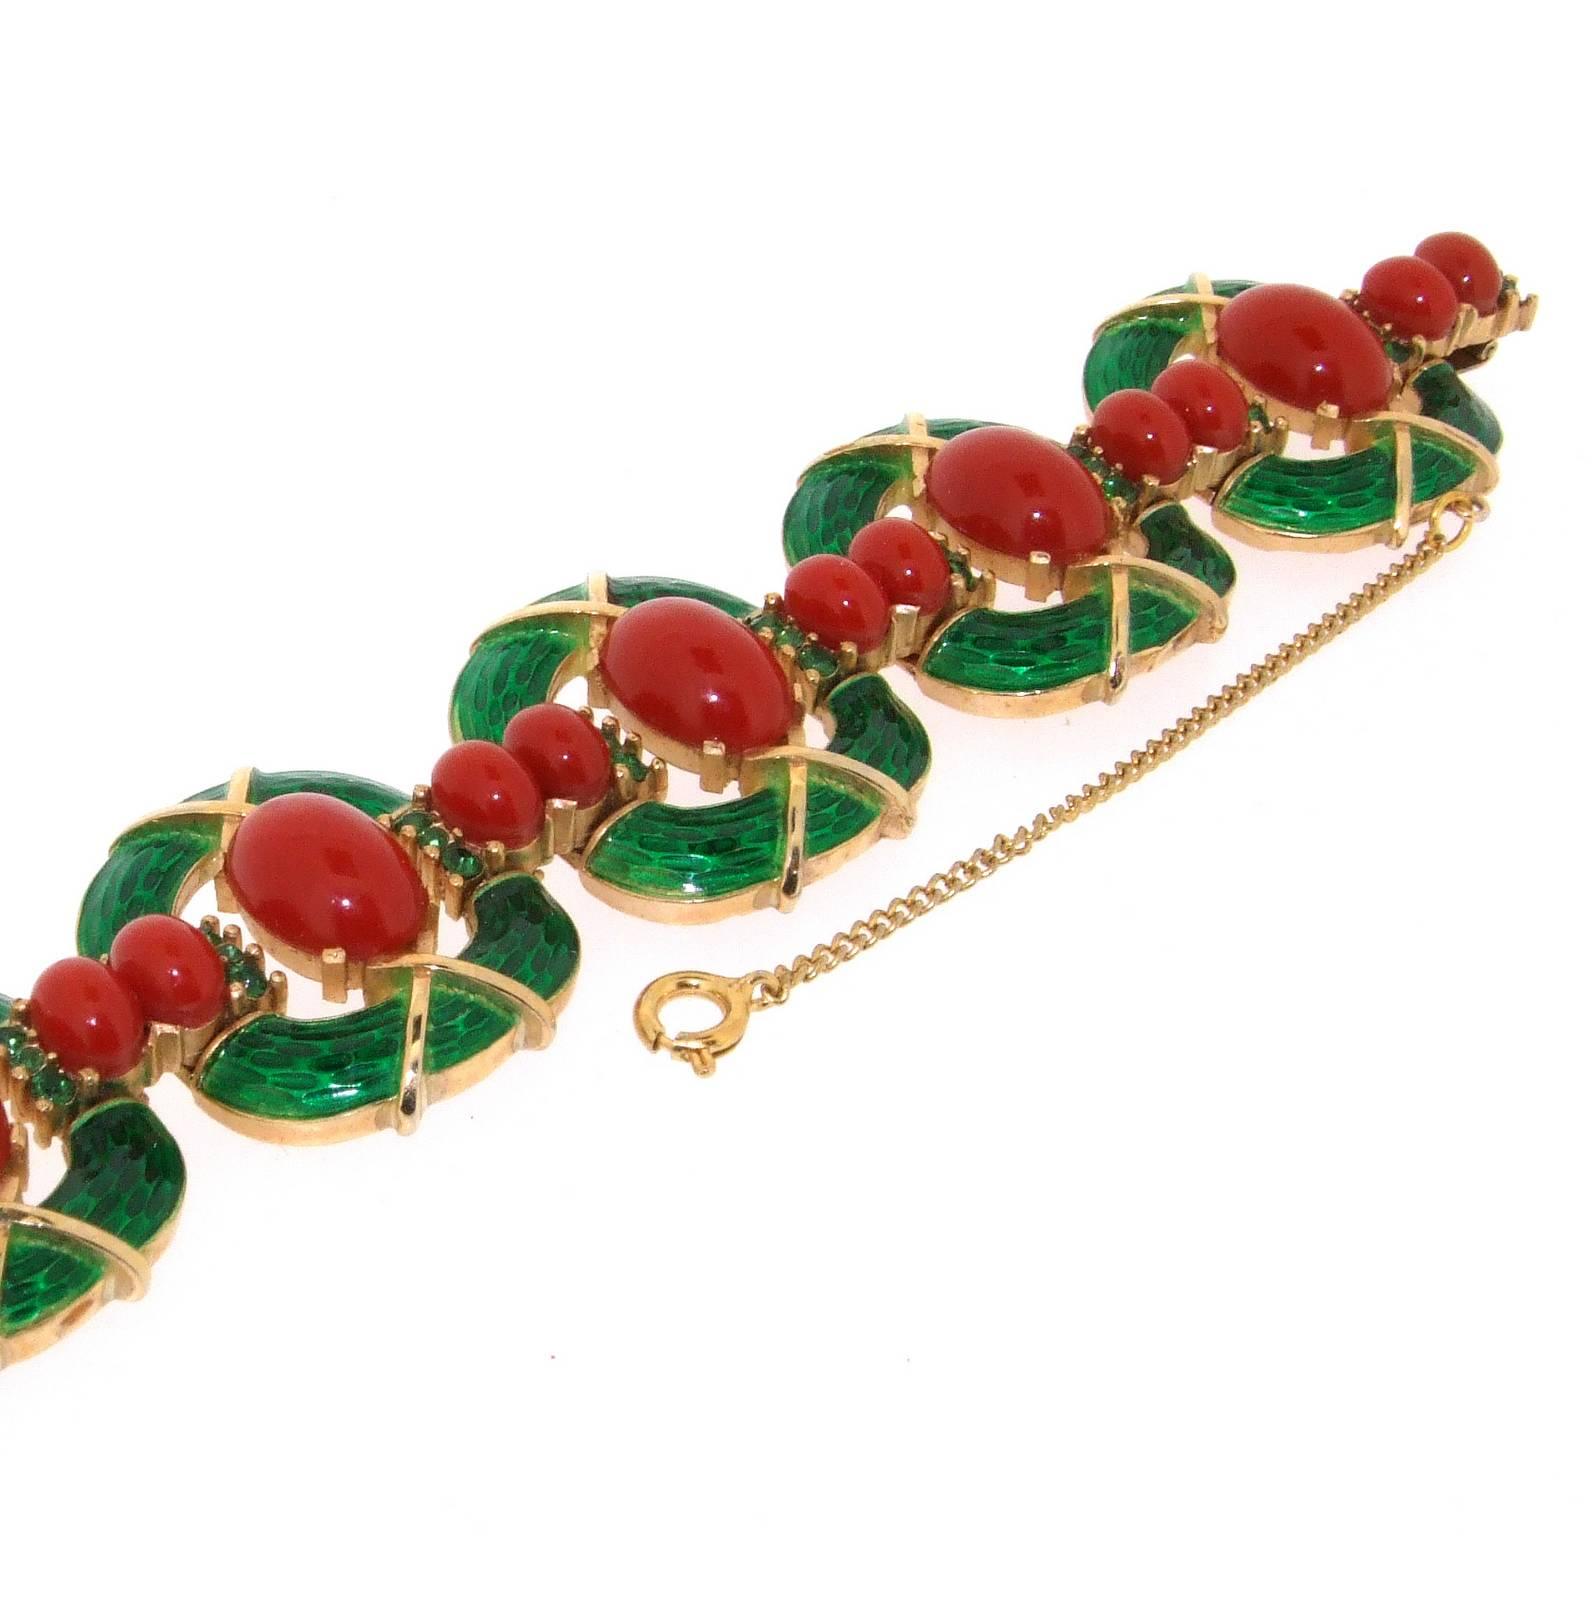 A rare vintage bracelet by Trifari from the L'Orient colection 1968. In gold tone metal with green enamel and carnelian coloured glass cabuchons.

Trifari was founded in the USA by Italian Gustavo Trifari in 1910. Chief designer of Trifari between